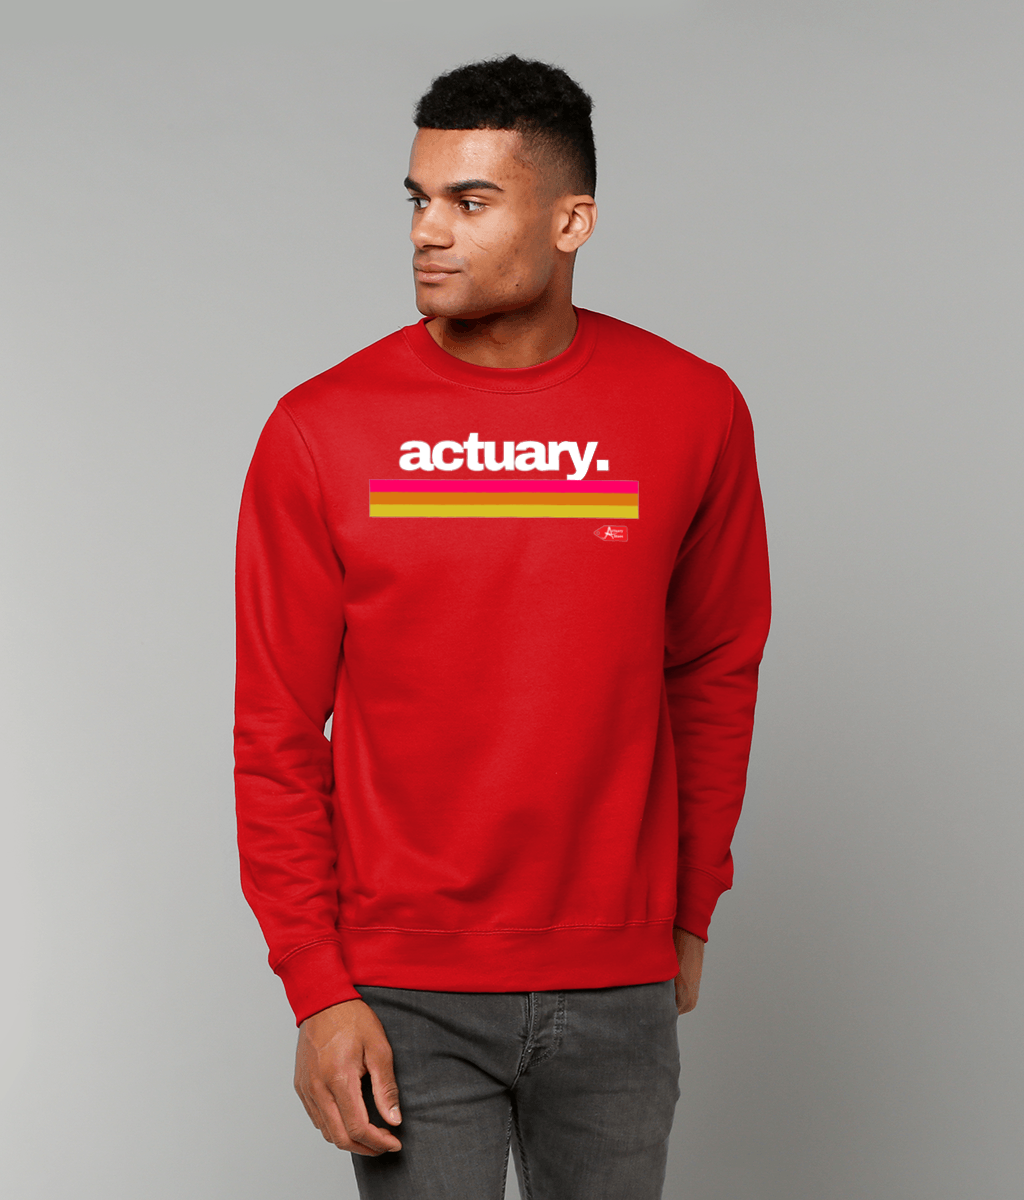 Actuary Stripes Sweatshirt (Red, Black and Green Variants)